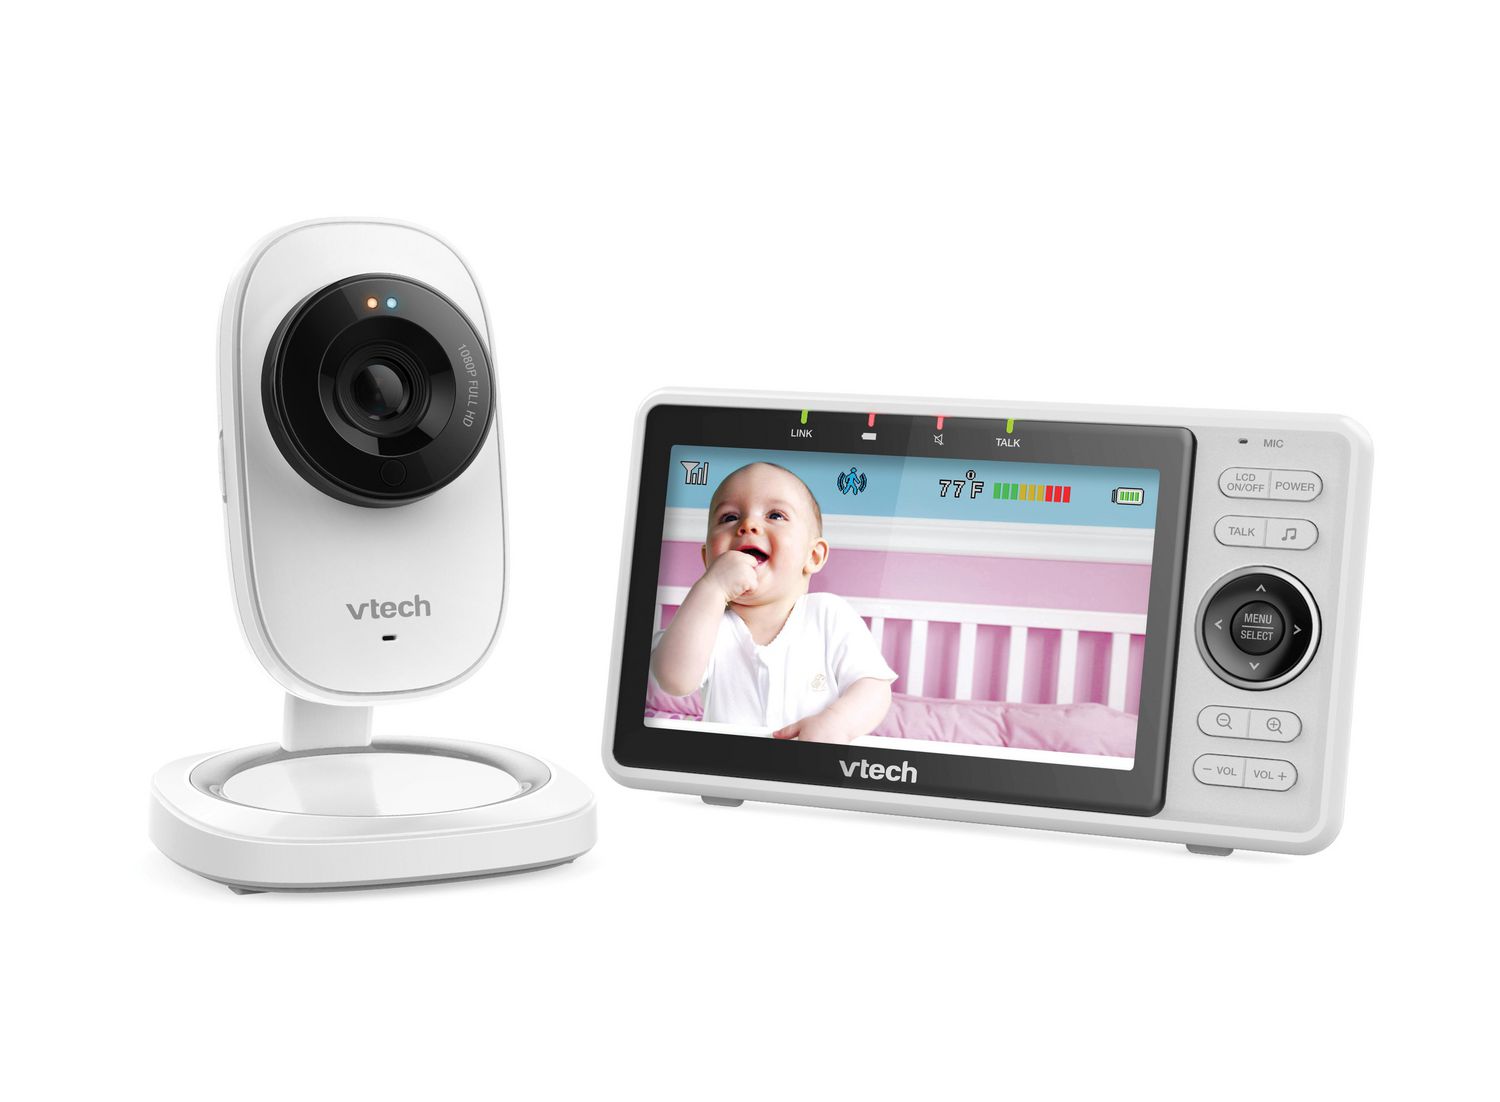 Vtech Rm5752 Wi Fi Remote Access Video Baby Monitor With 5 1080p Hd Camera Automatic Night Vision 1 Camera White Walmart Canada